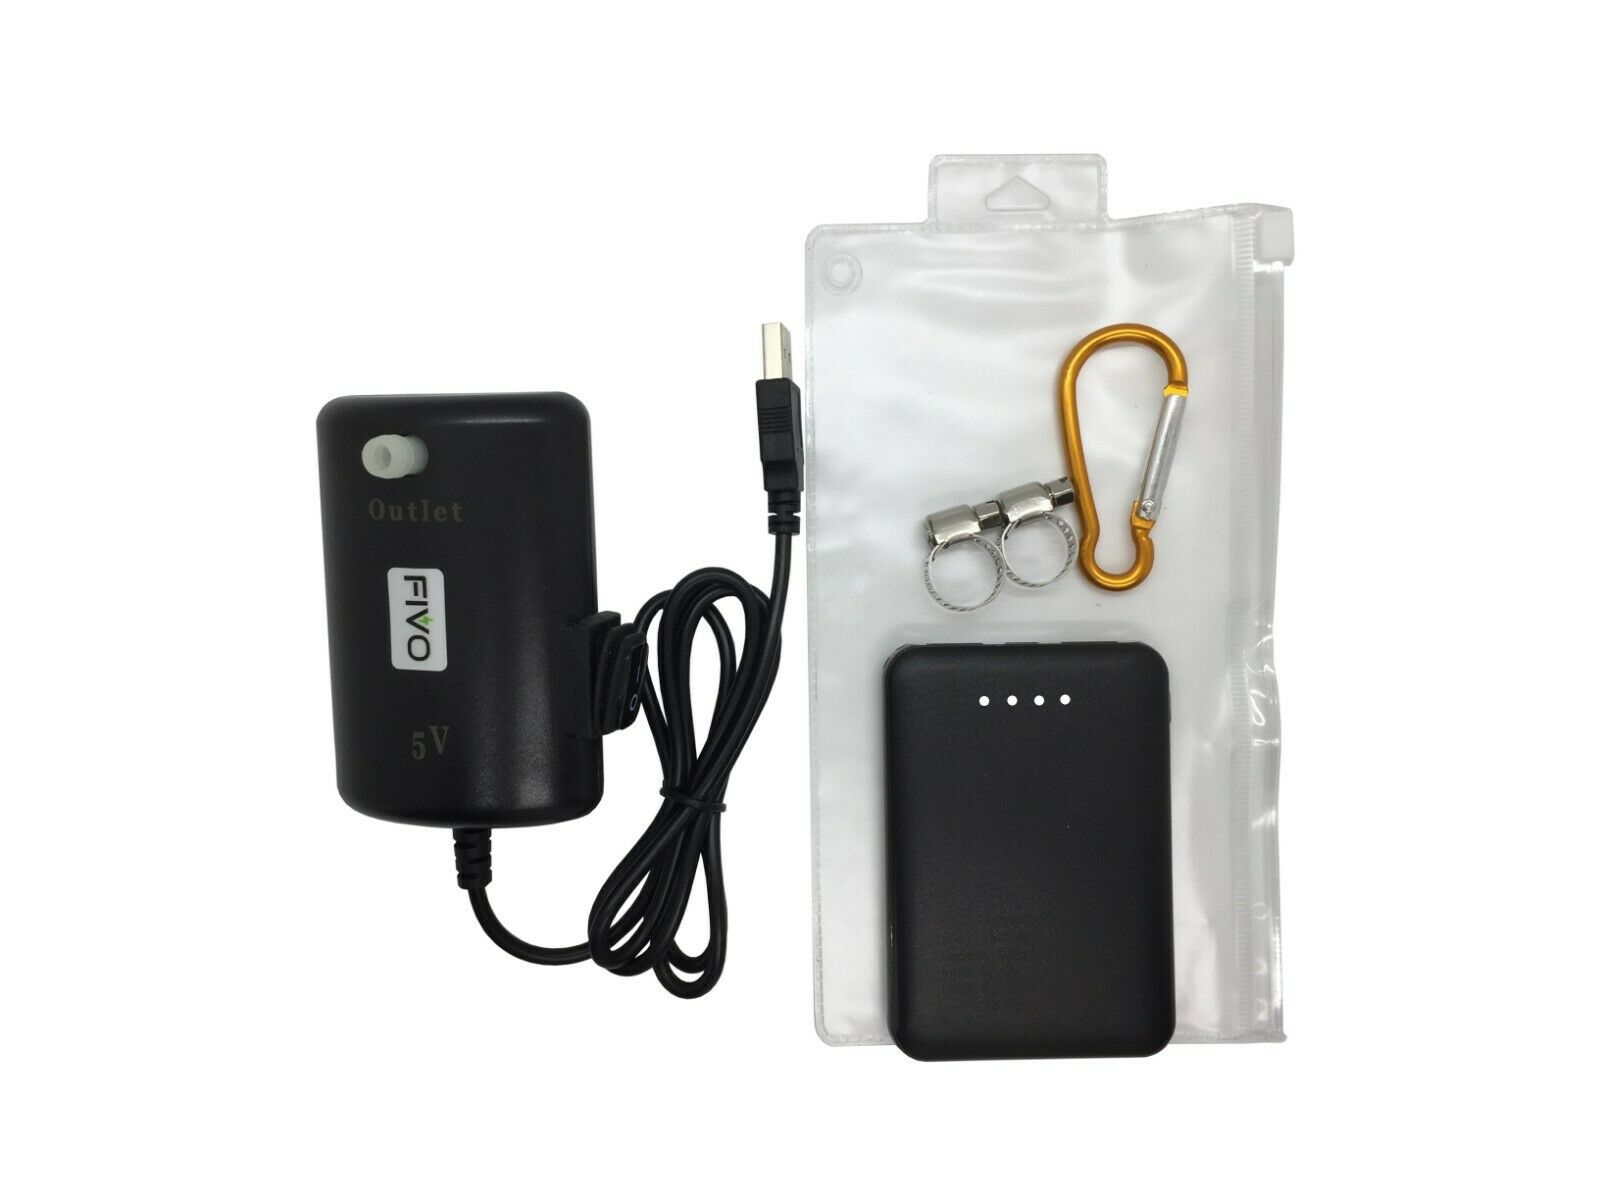 Powered Sprayer DIY Kit for upgrading manual to pumpless with Li-ion Power Bank